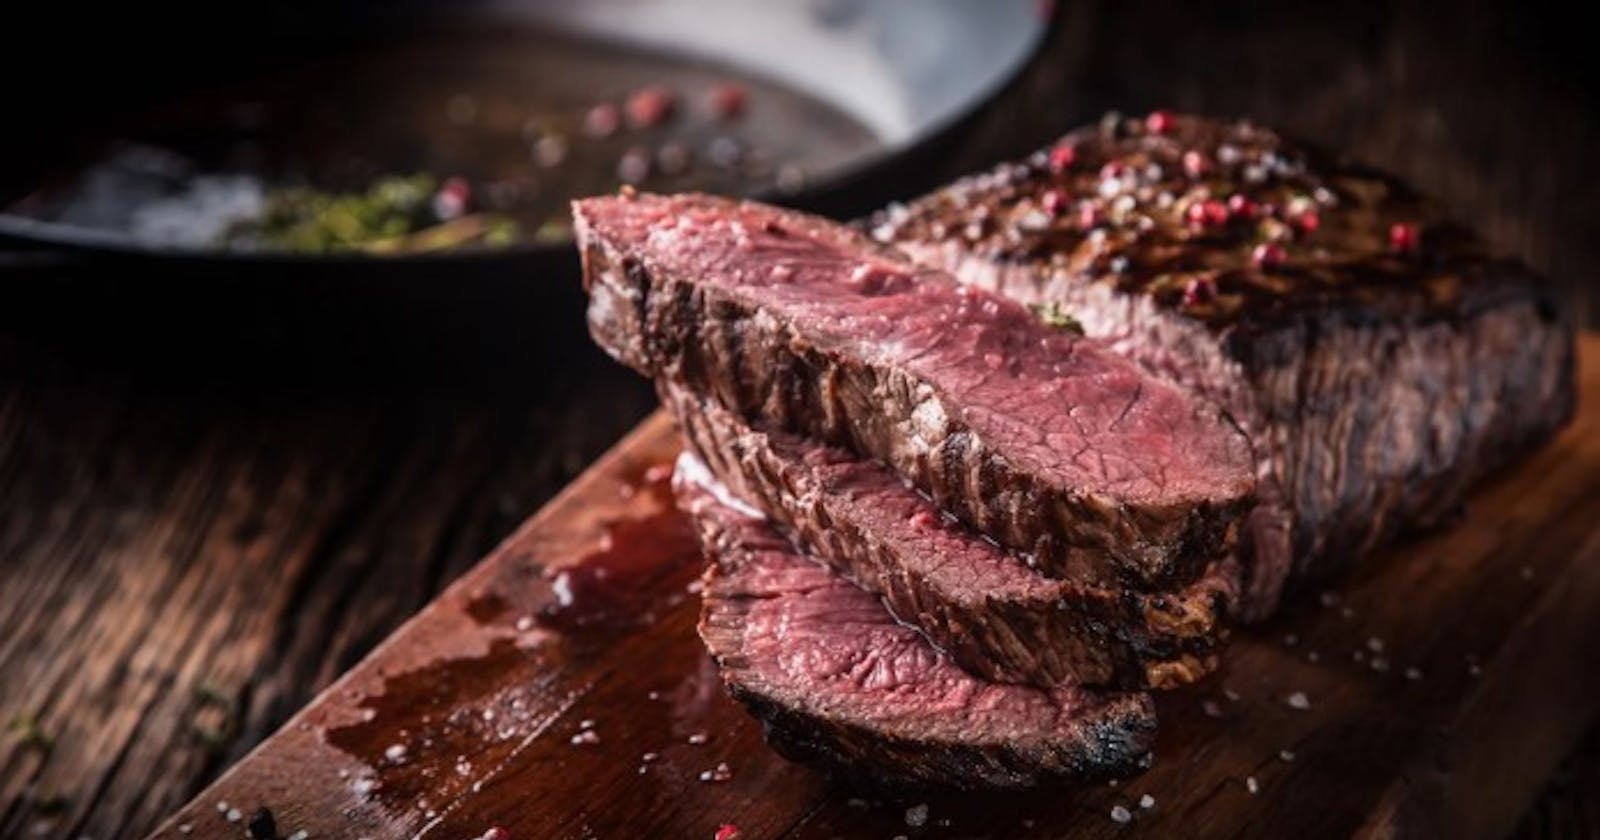 Choose Springhill Beef Co for Premium Meat Delivered to Your Door